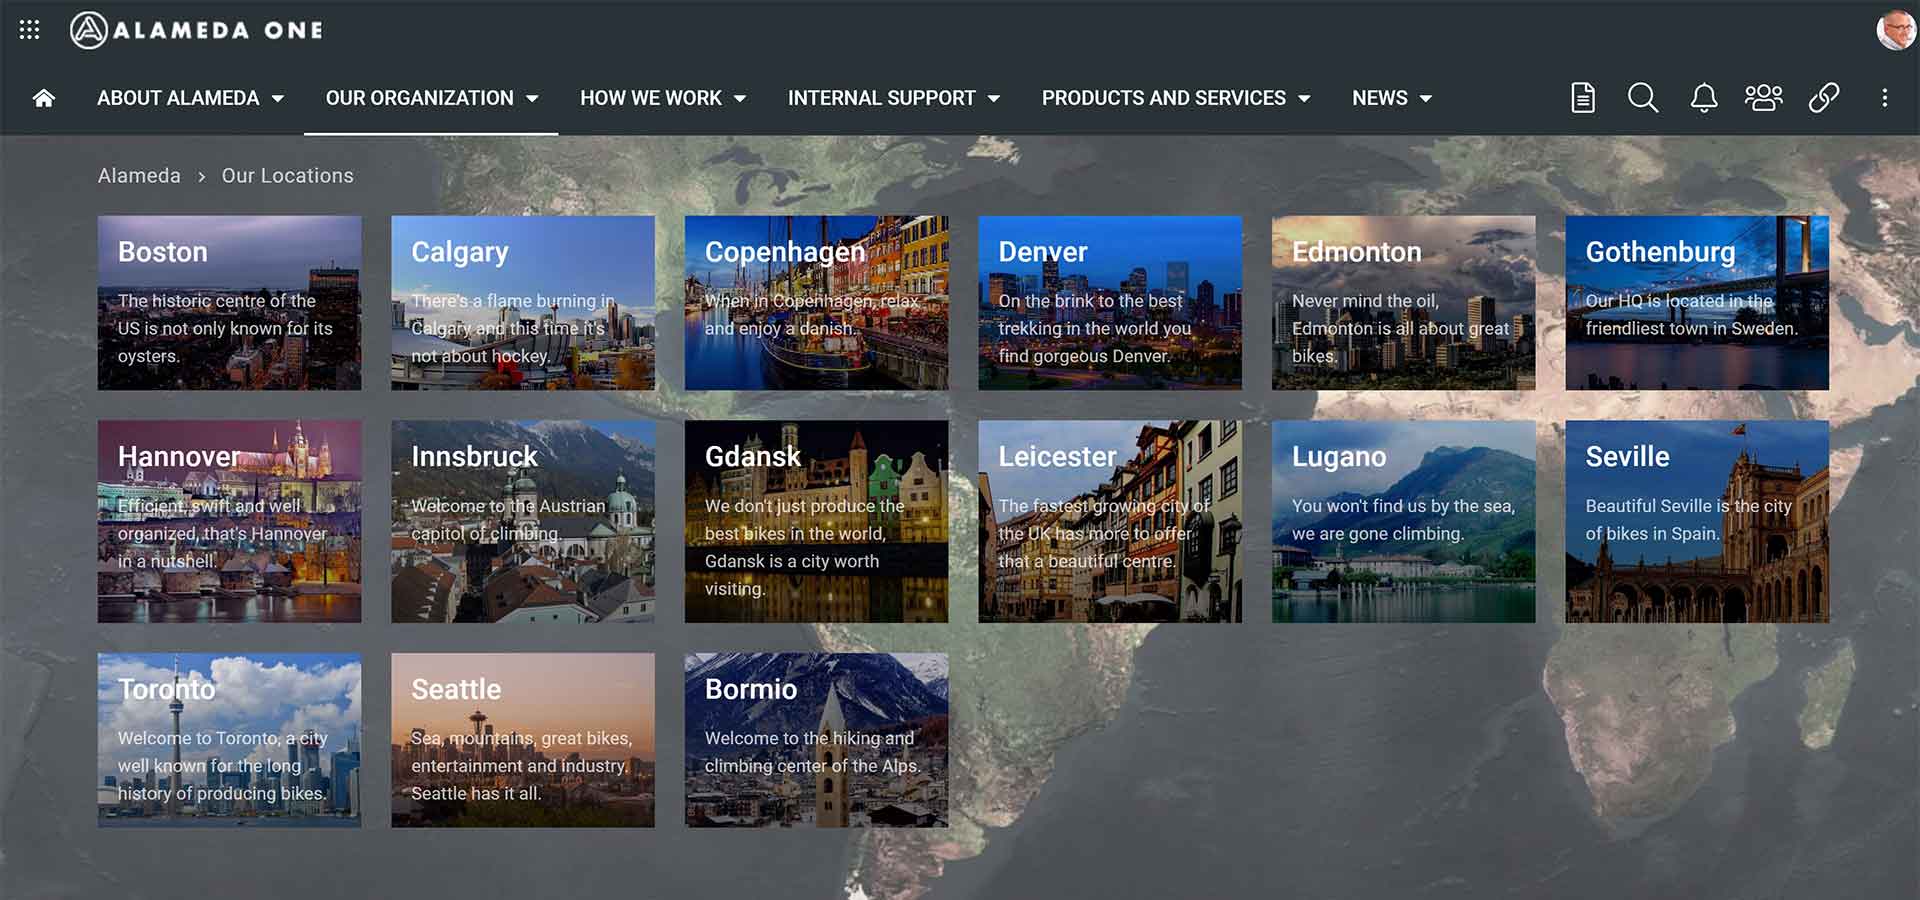 Image 2: Landing page for Our locations